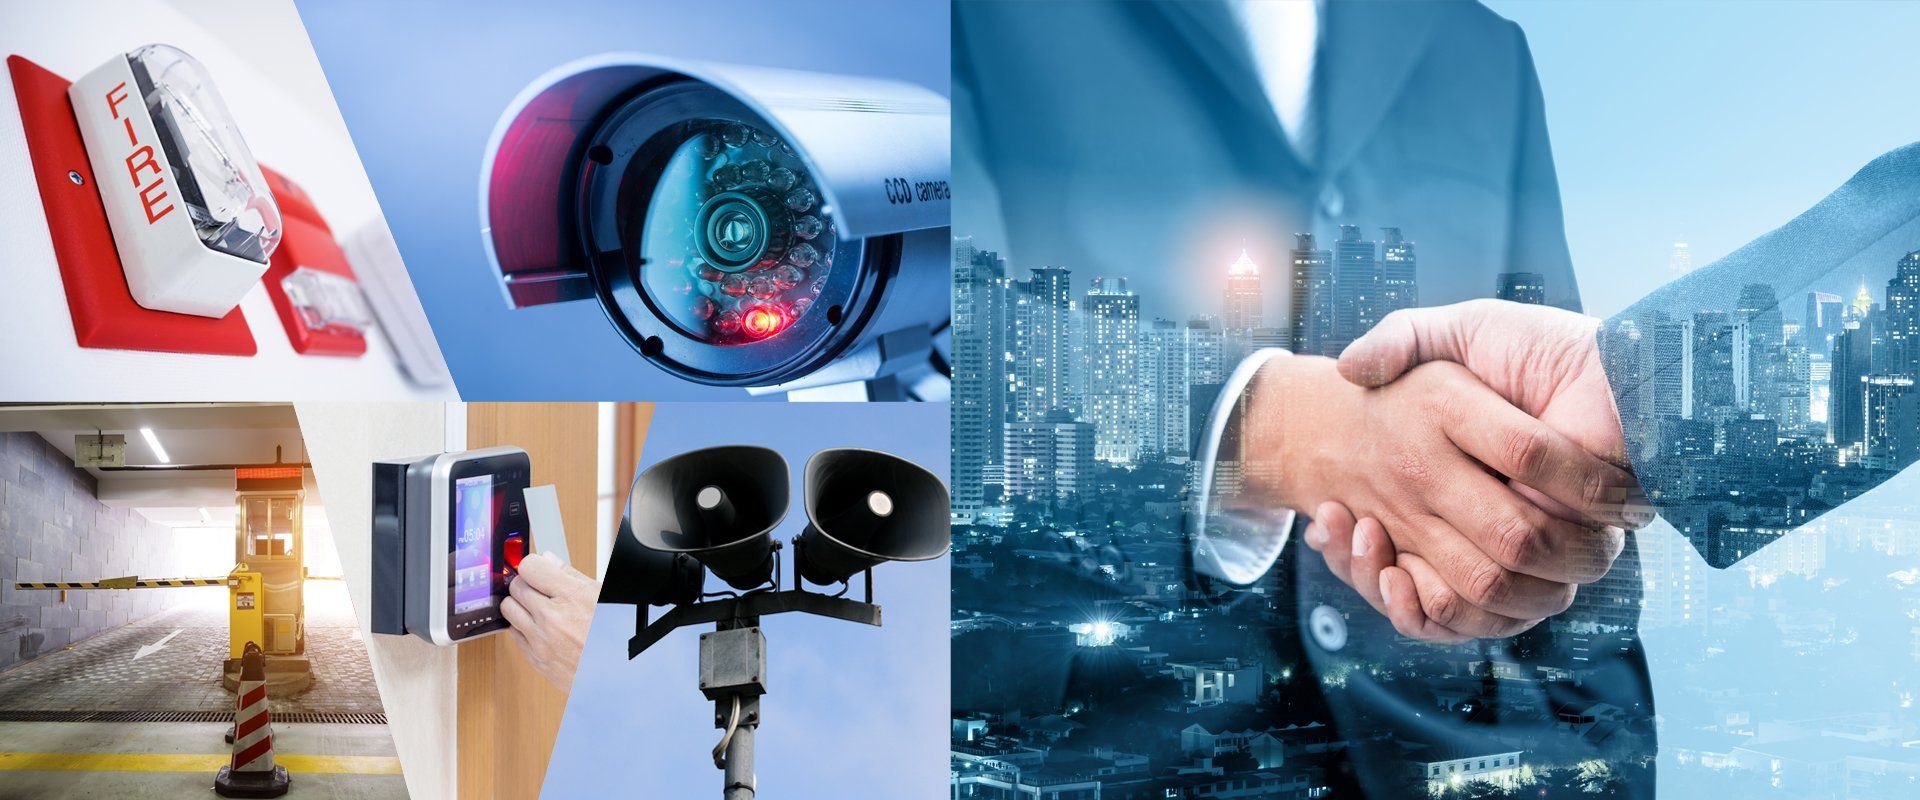 ELV Systems In Building Security 